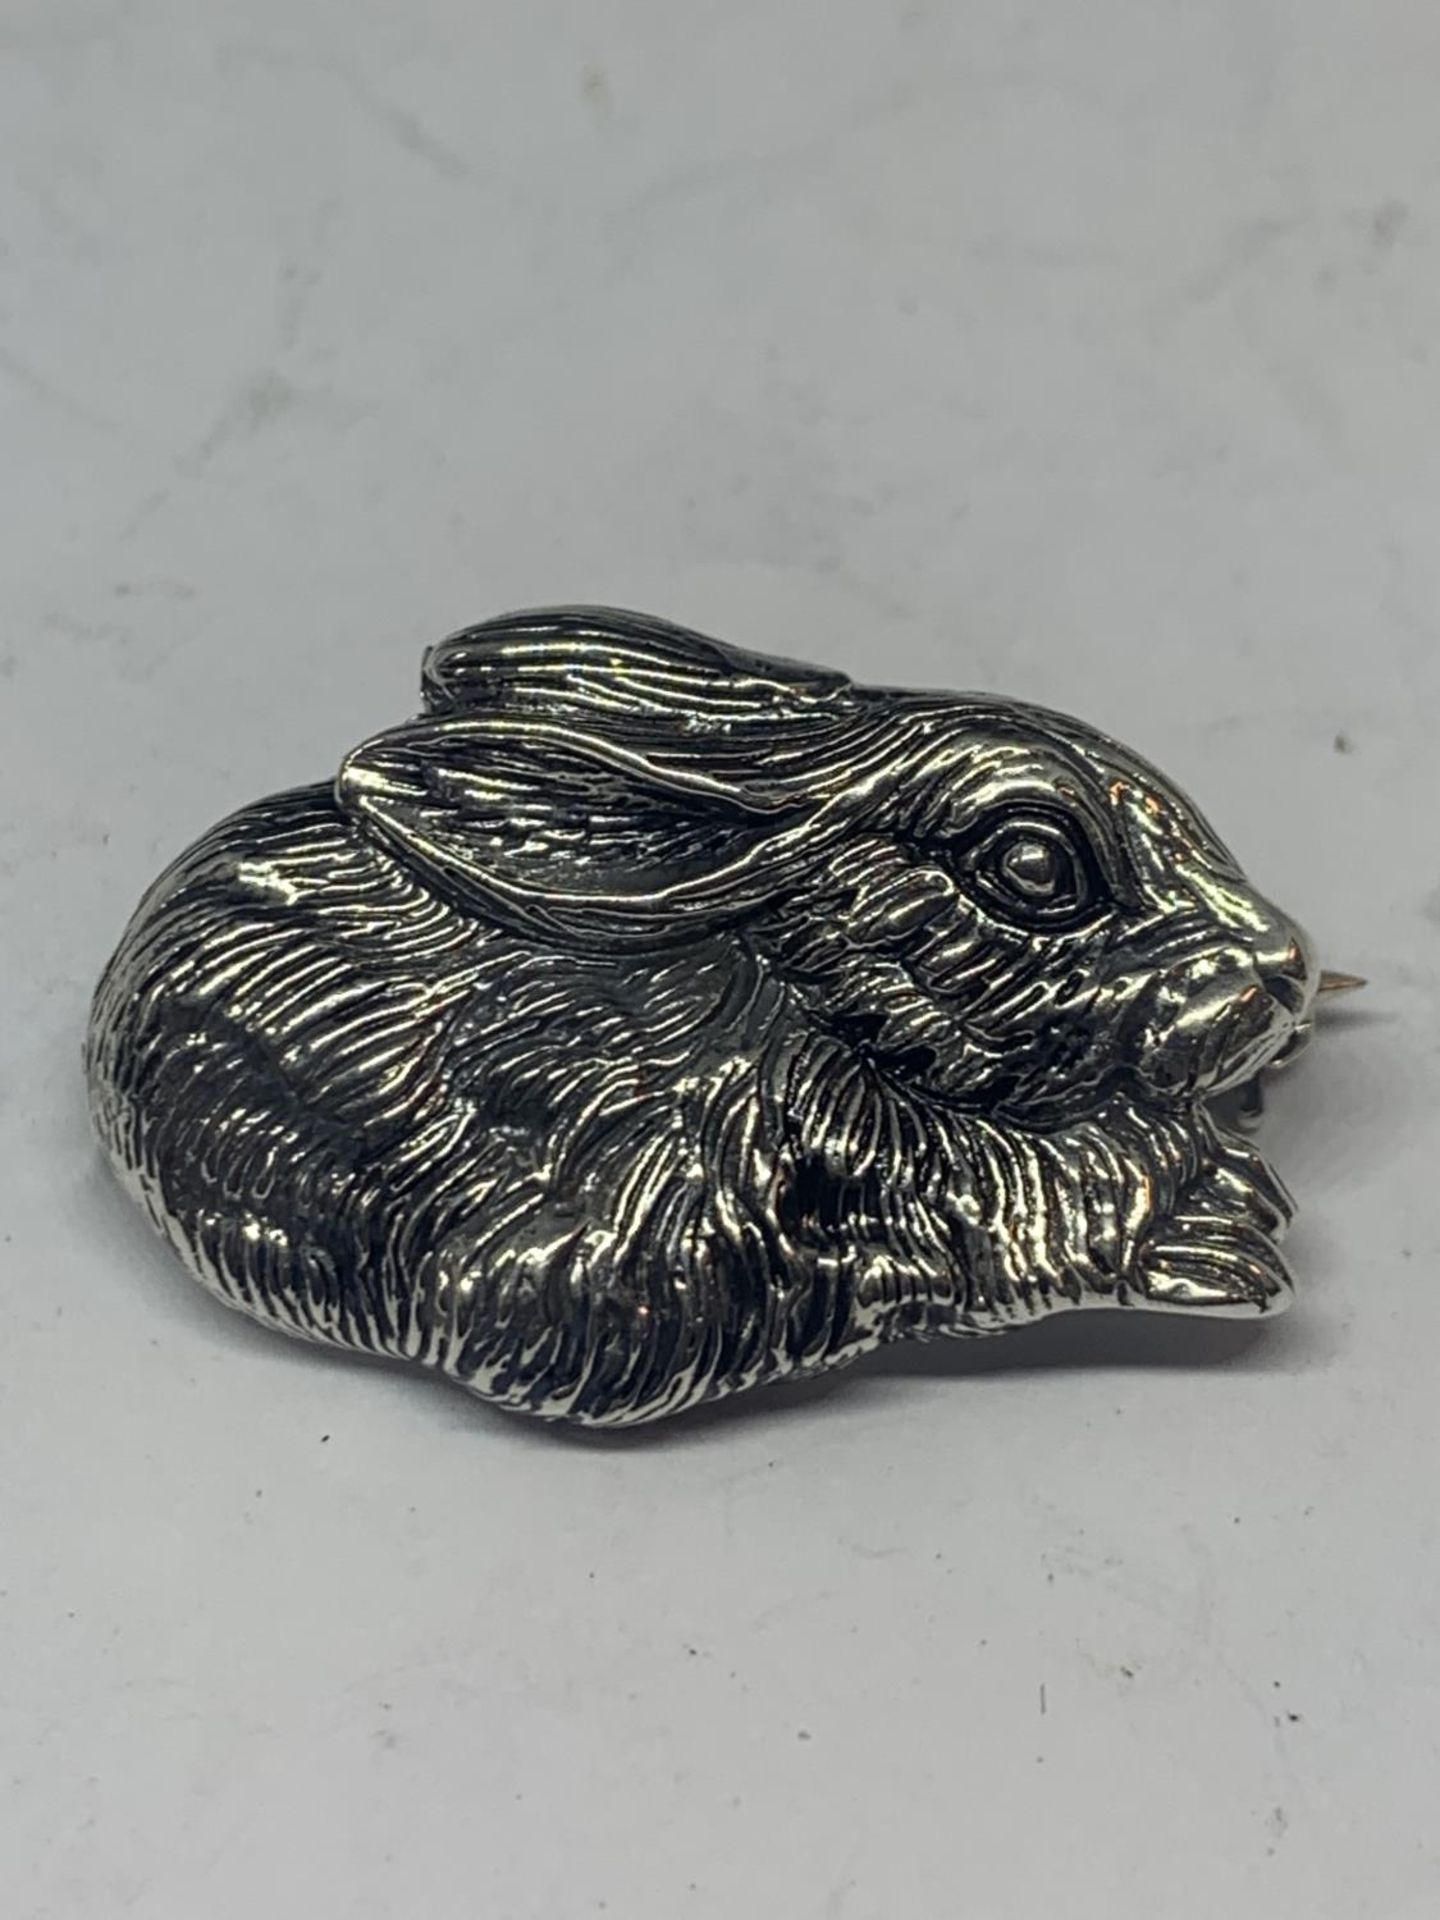 A MARKED SILVER RABBIT BROOCH - Image 2 of 4